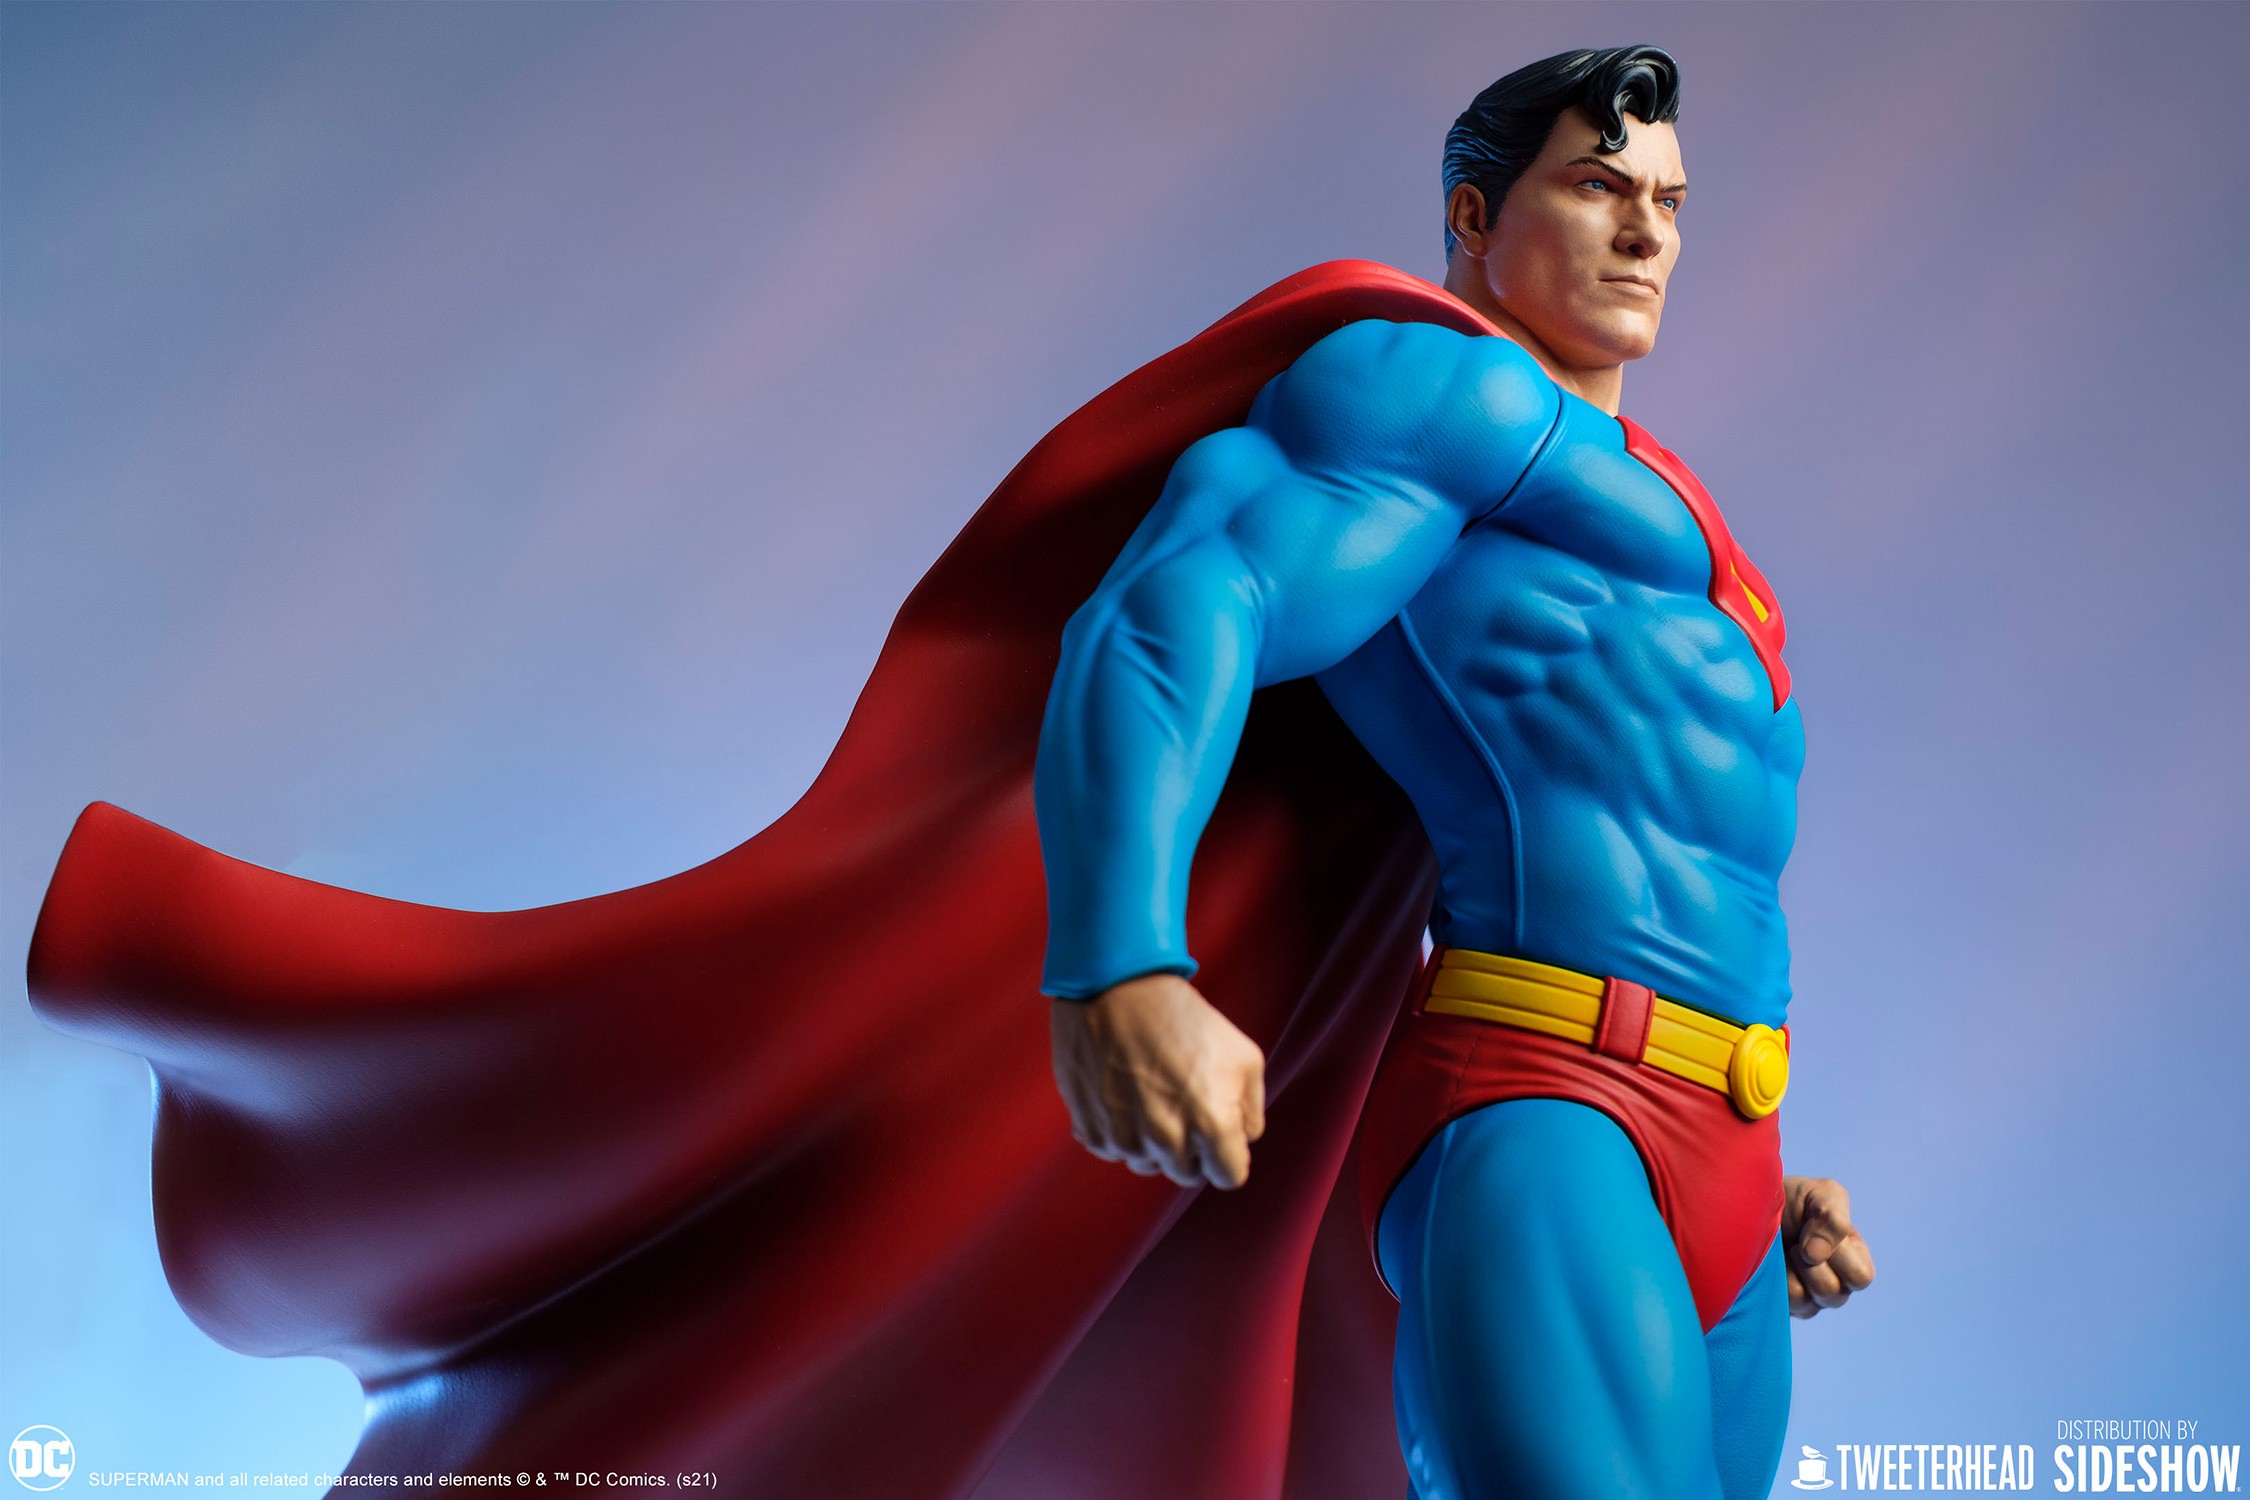 Superman Exclusive Edition (Prototype Shown) View 10